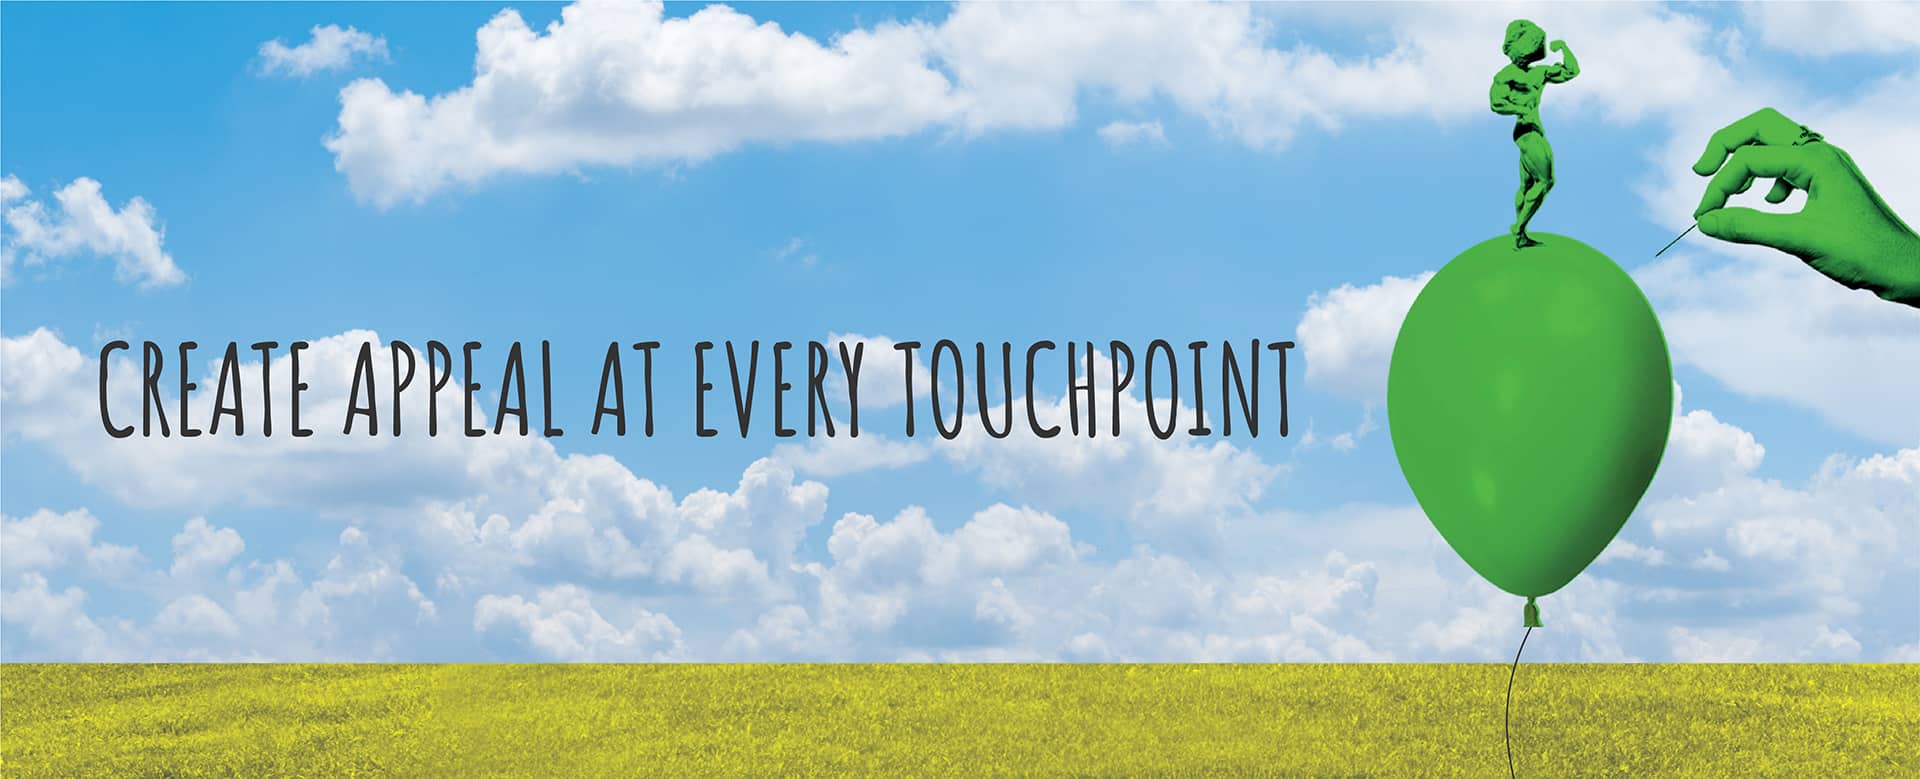 Create Appeal at Every Touchpoint